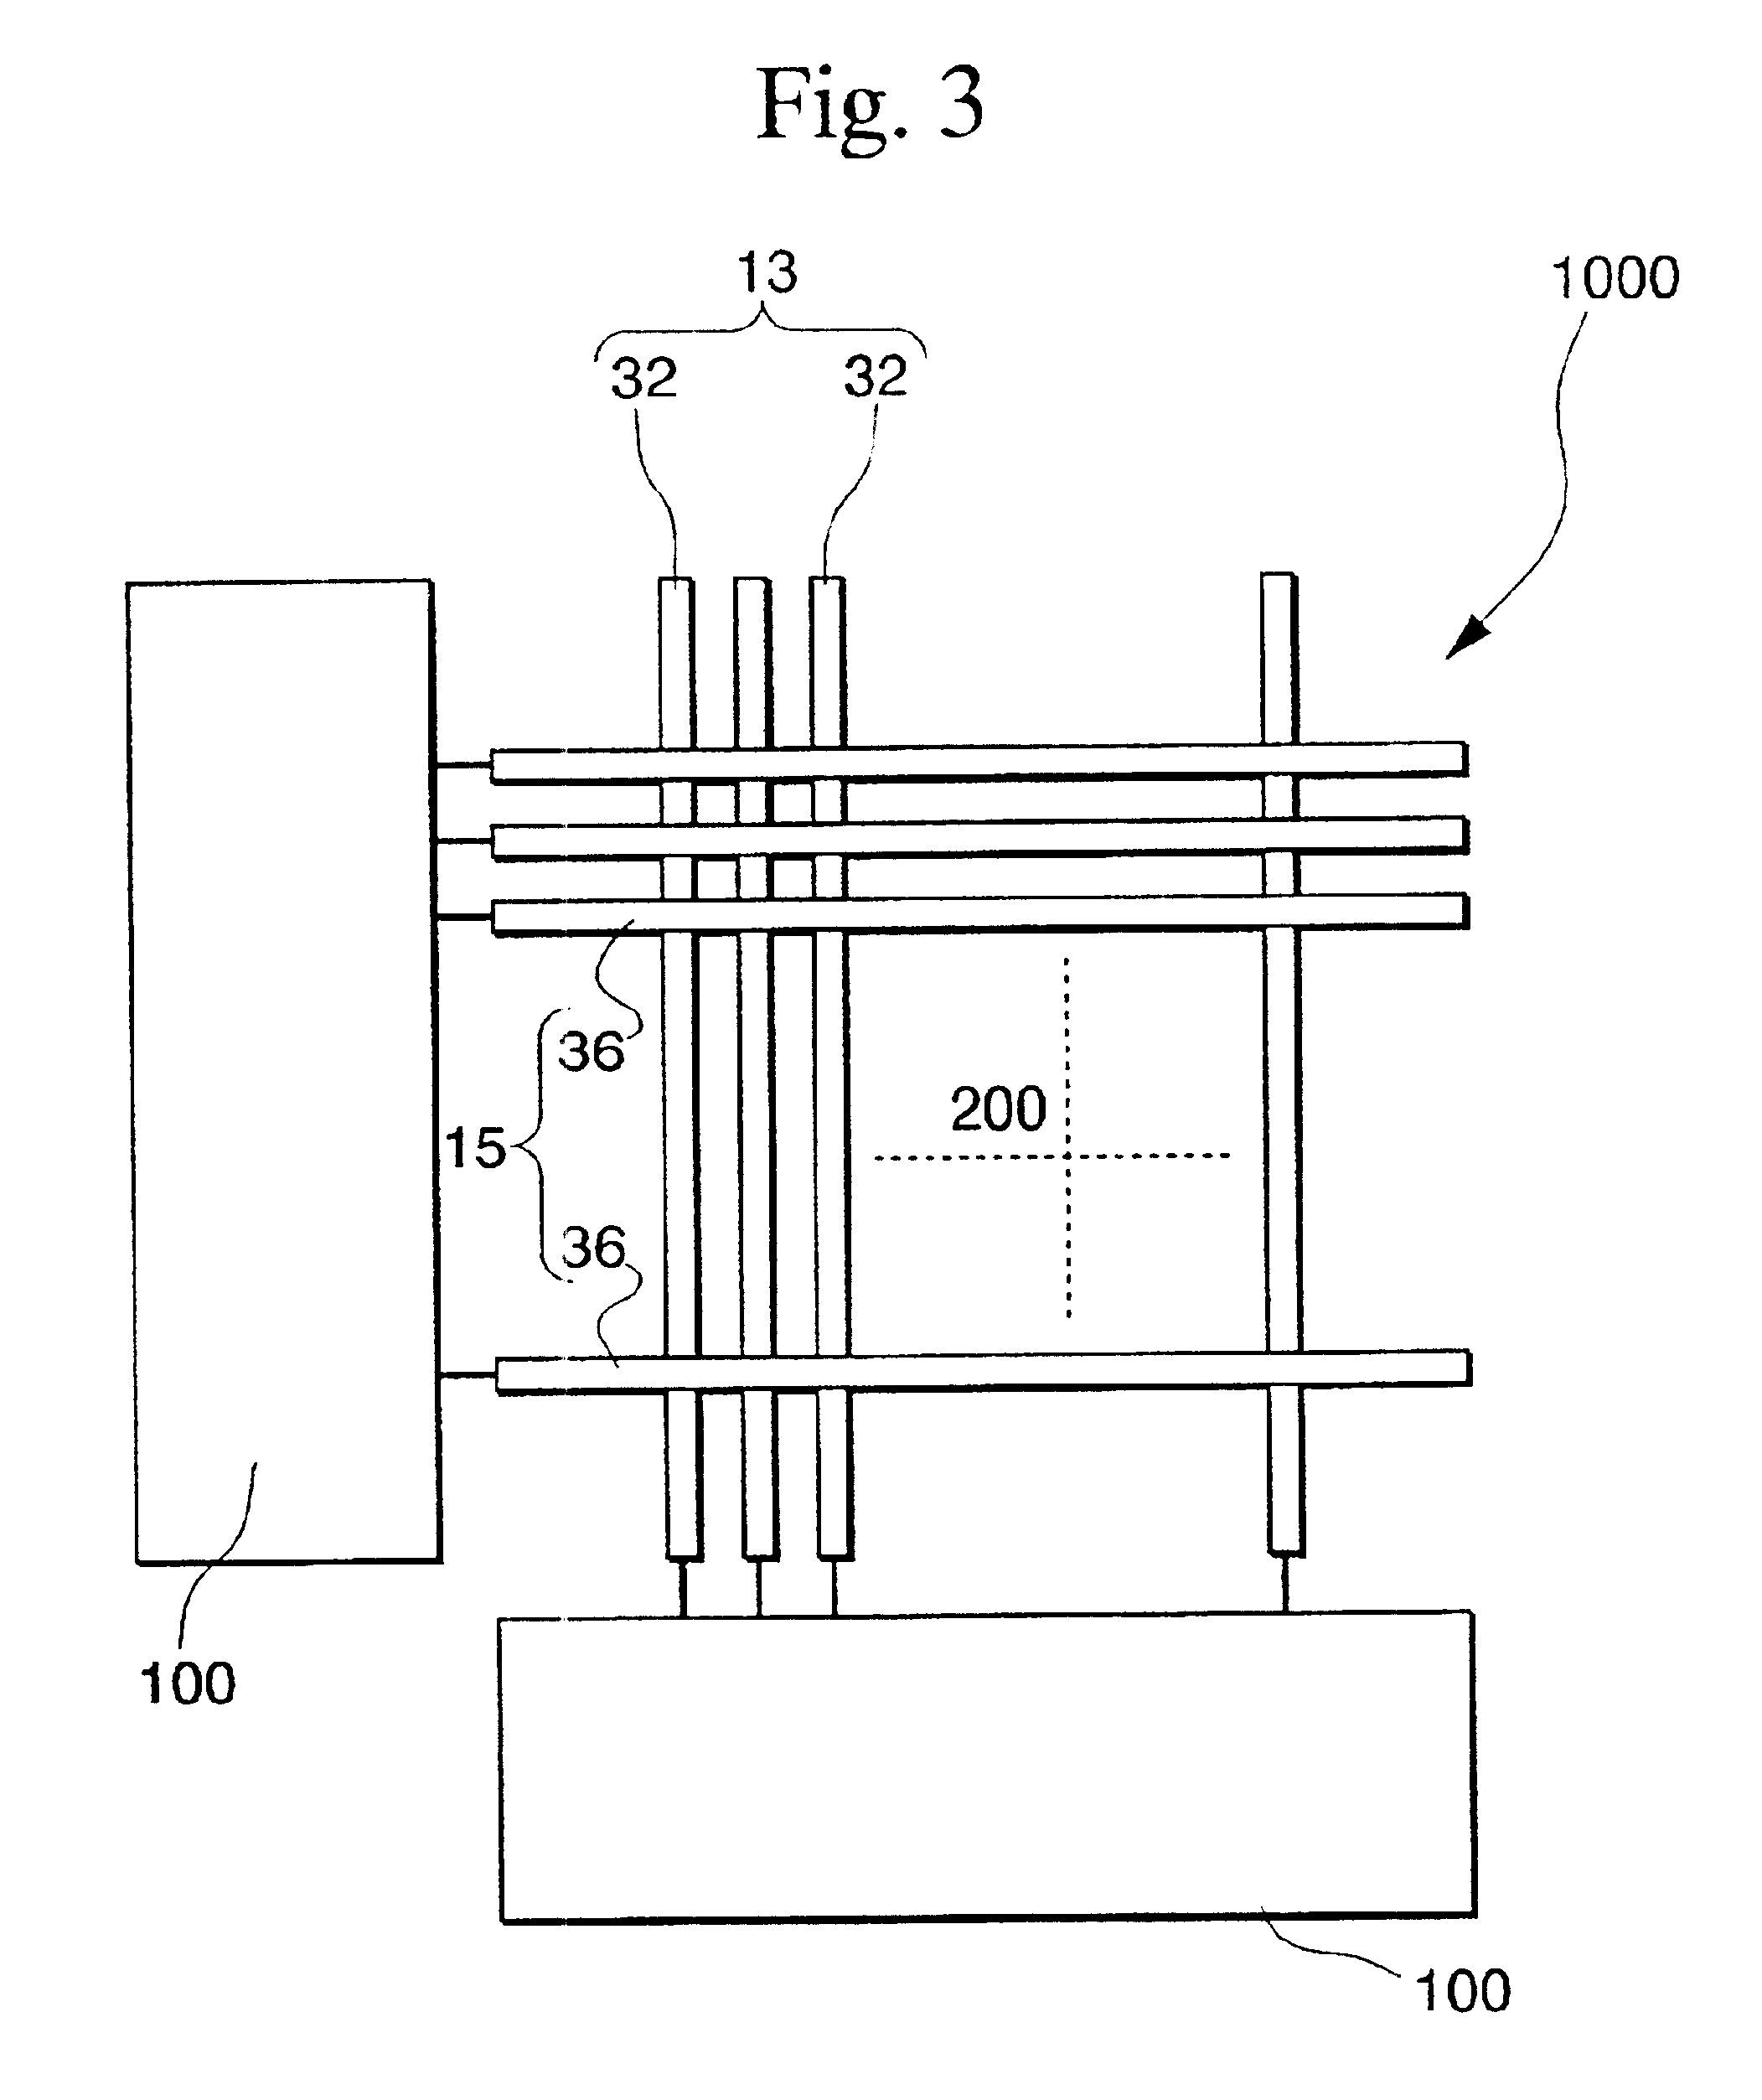 Ferroelectric memory and electronic apparatus